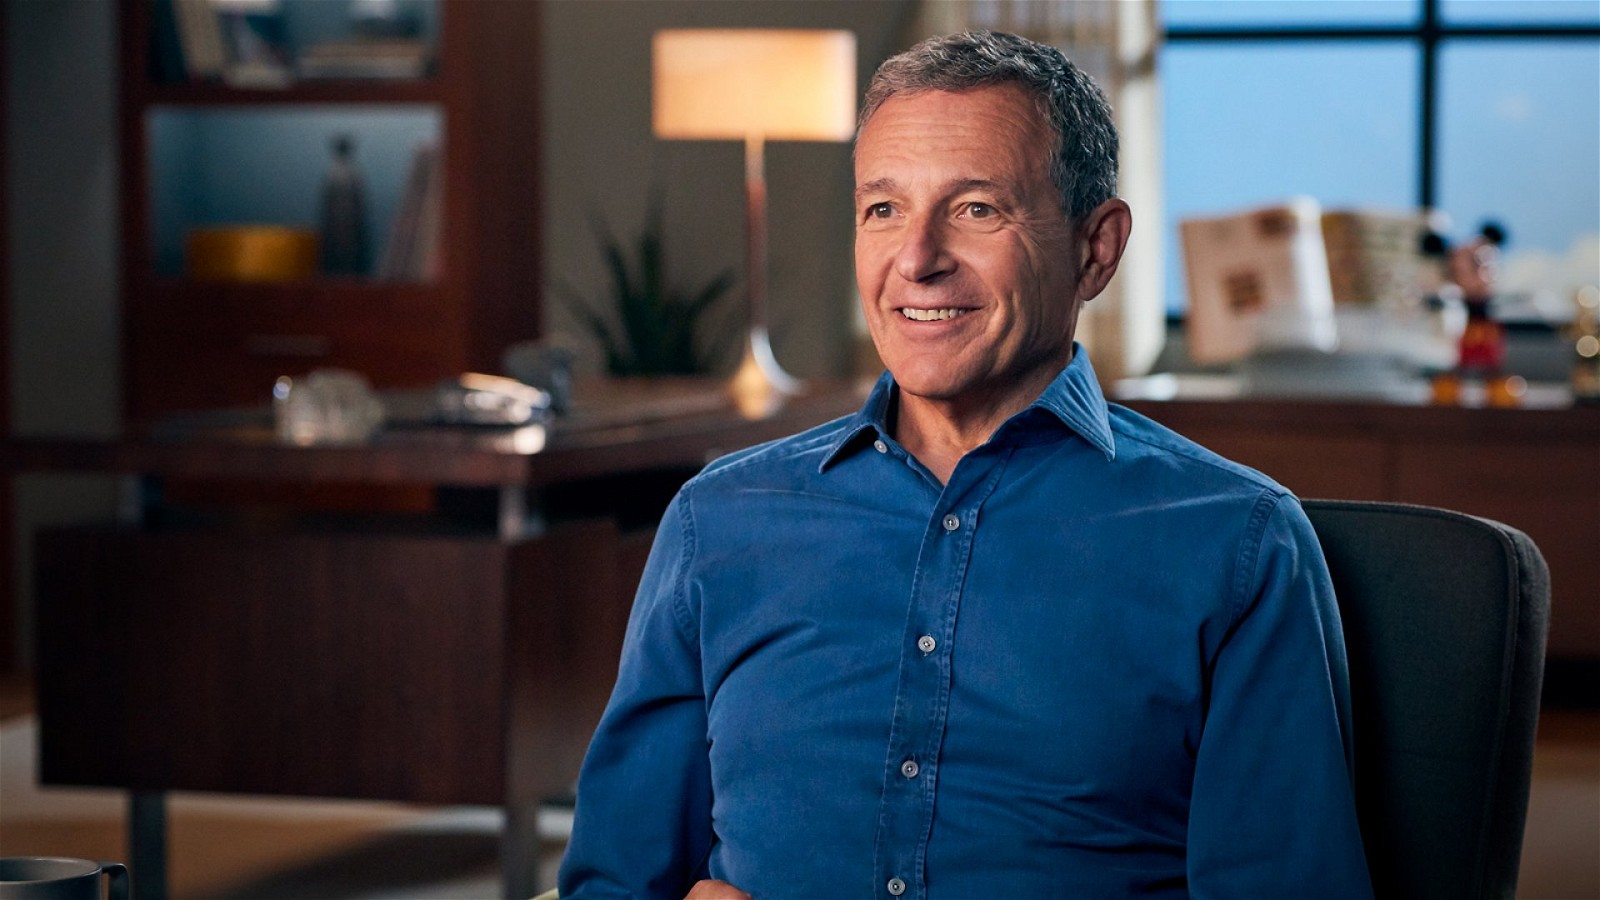 Bob Iger is the current CEO of Disney.